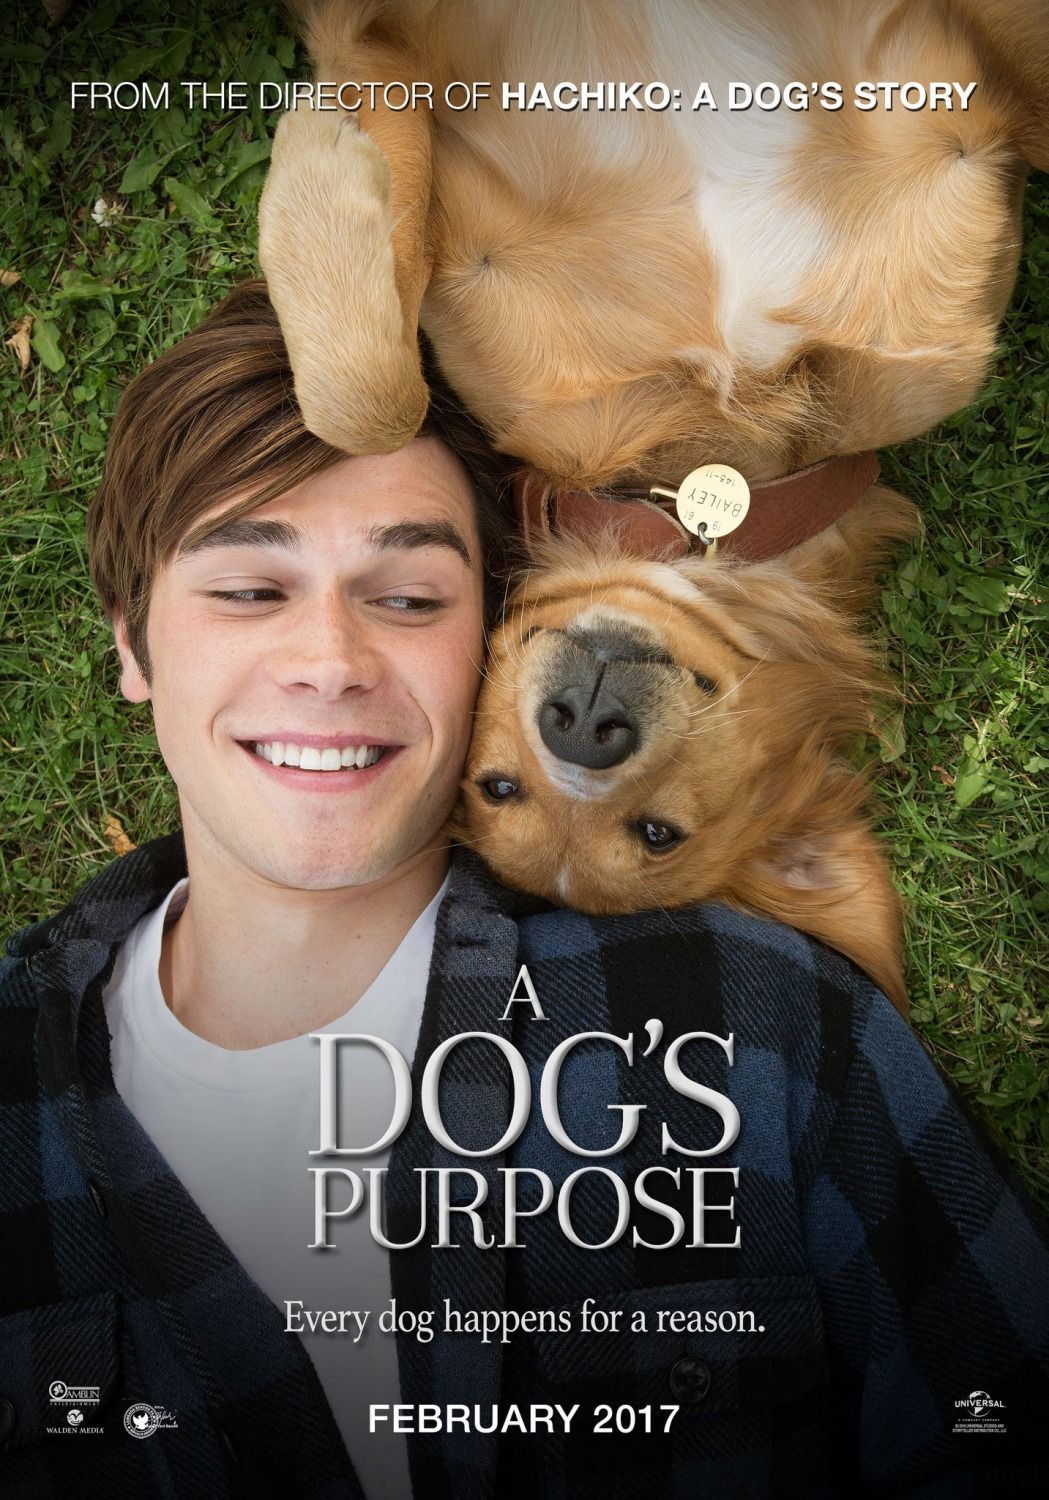 A dog purpes ideas. a dogs purpose, a dogs purpose movie, dogs